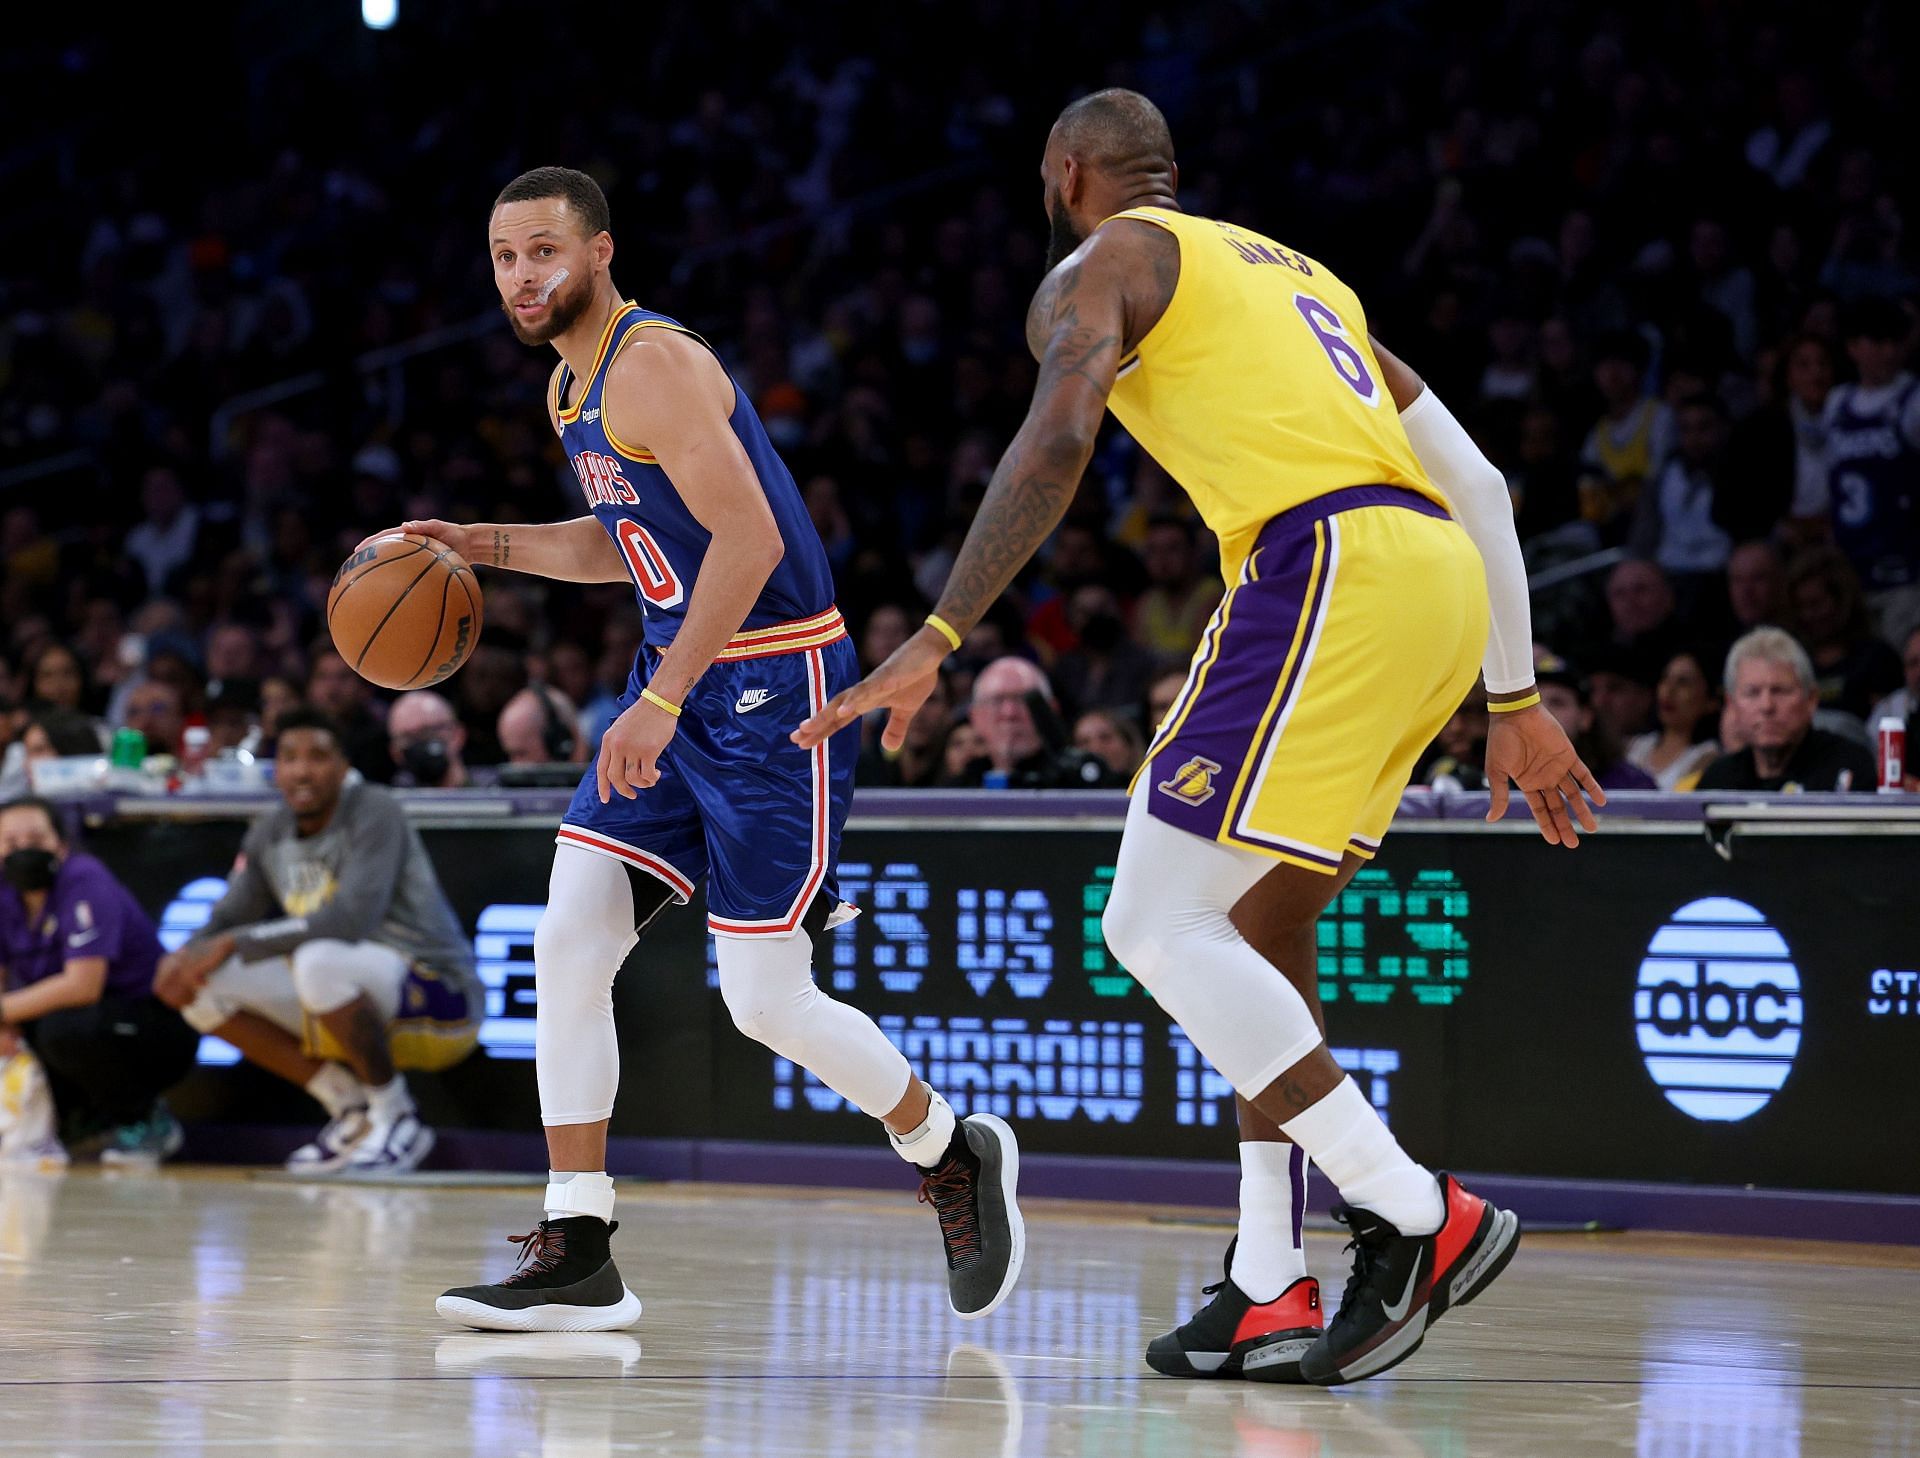 Stephen Curry of the Golden State Warriors against LeBron James of the LA Lakers